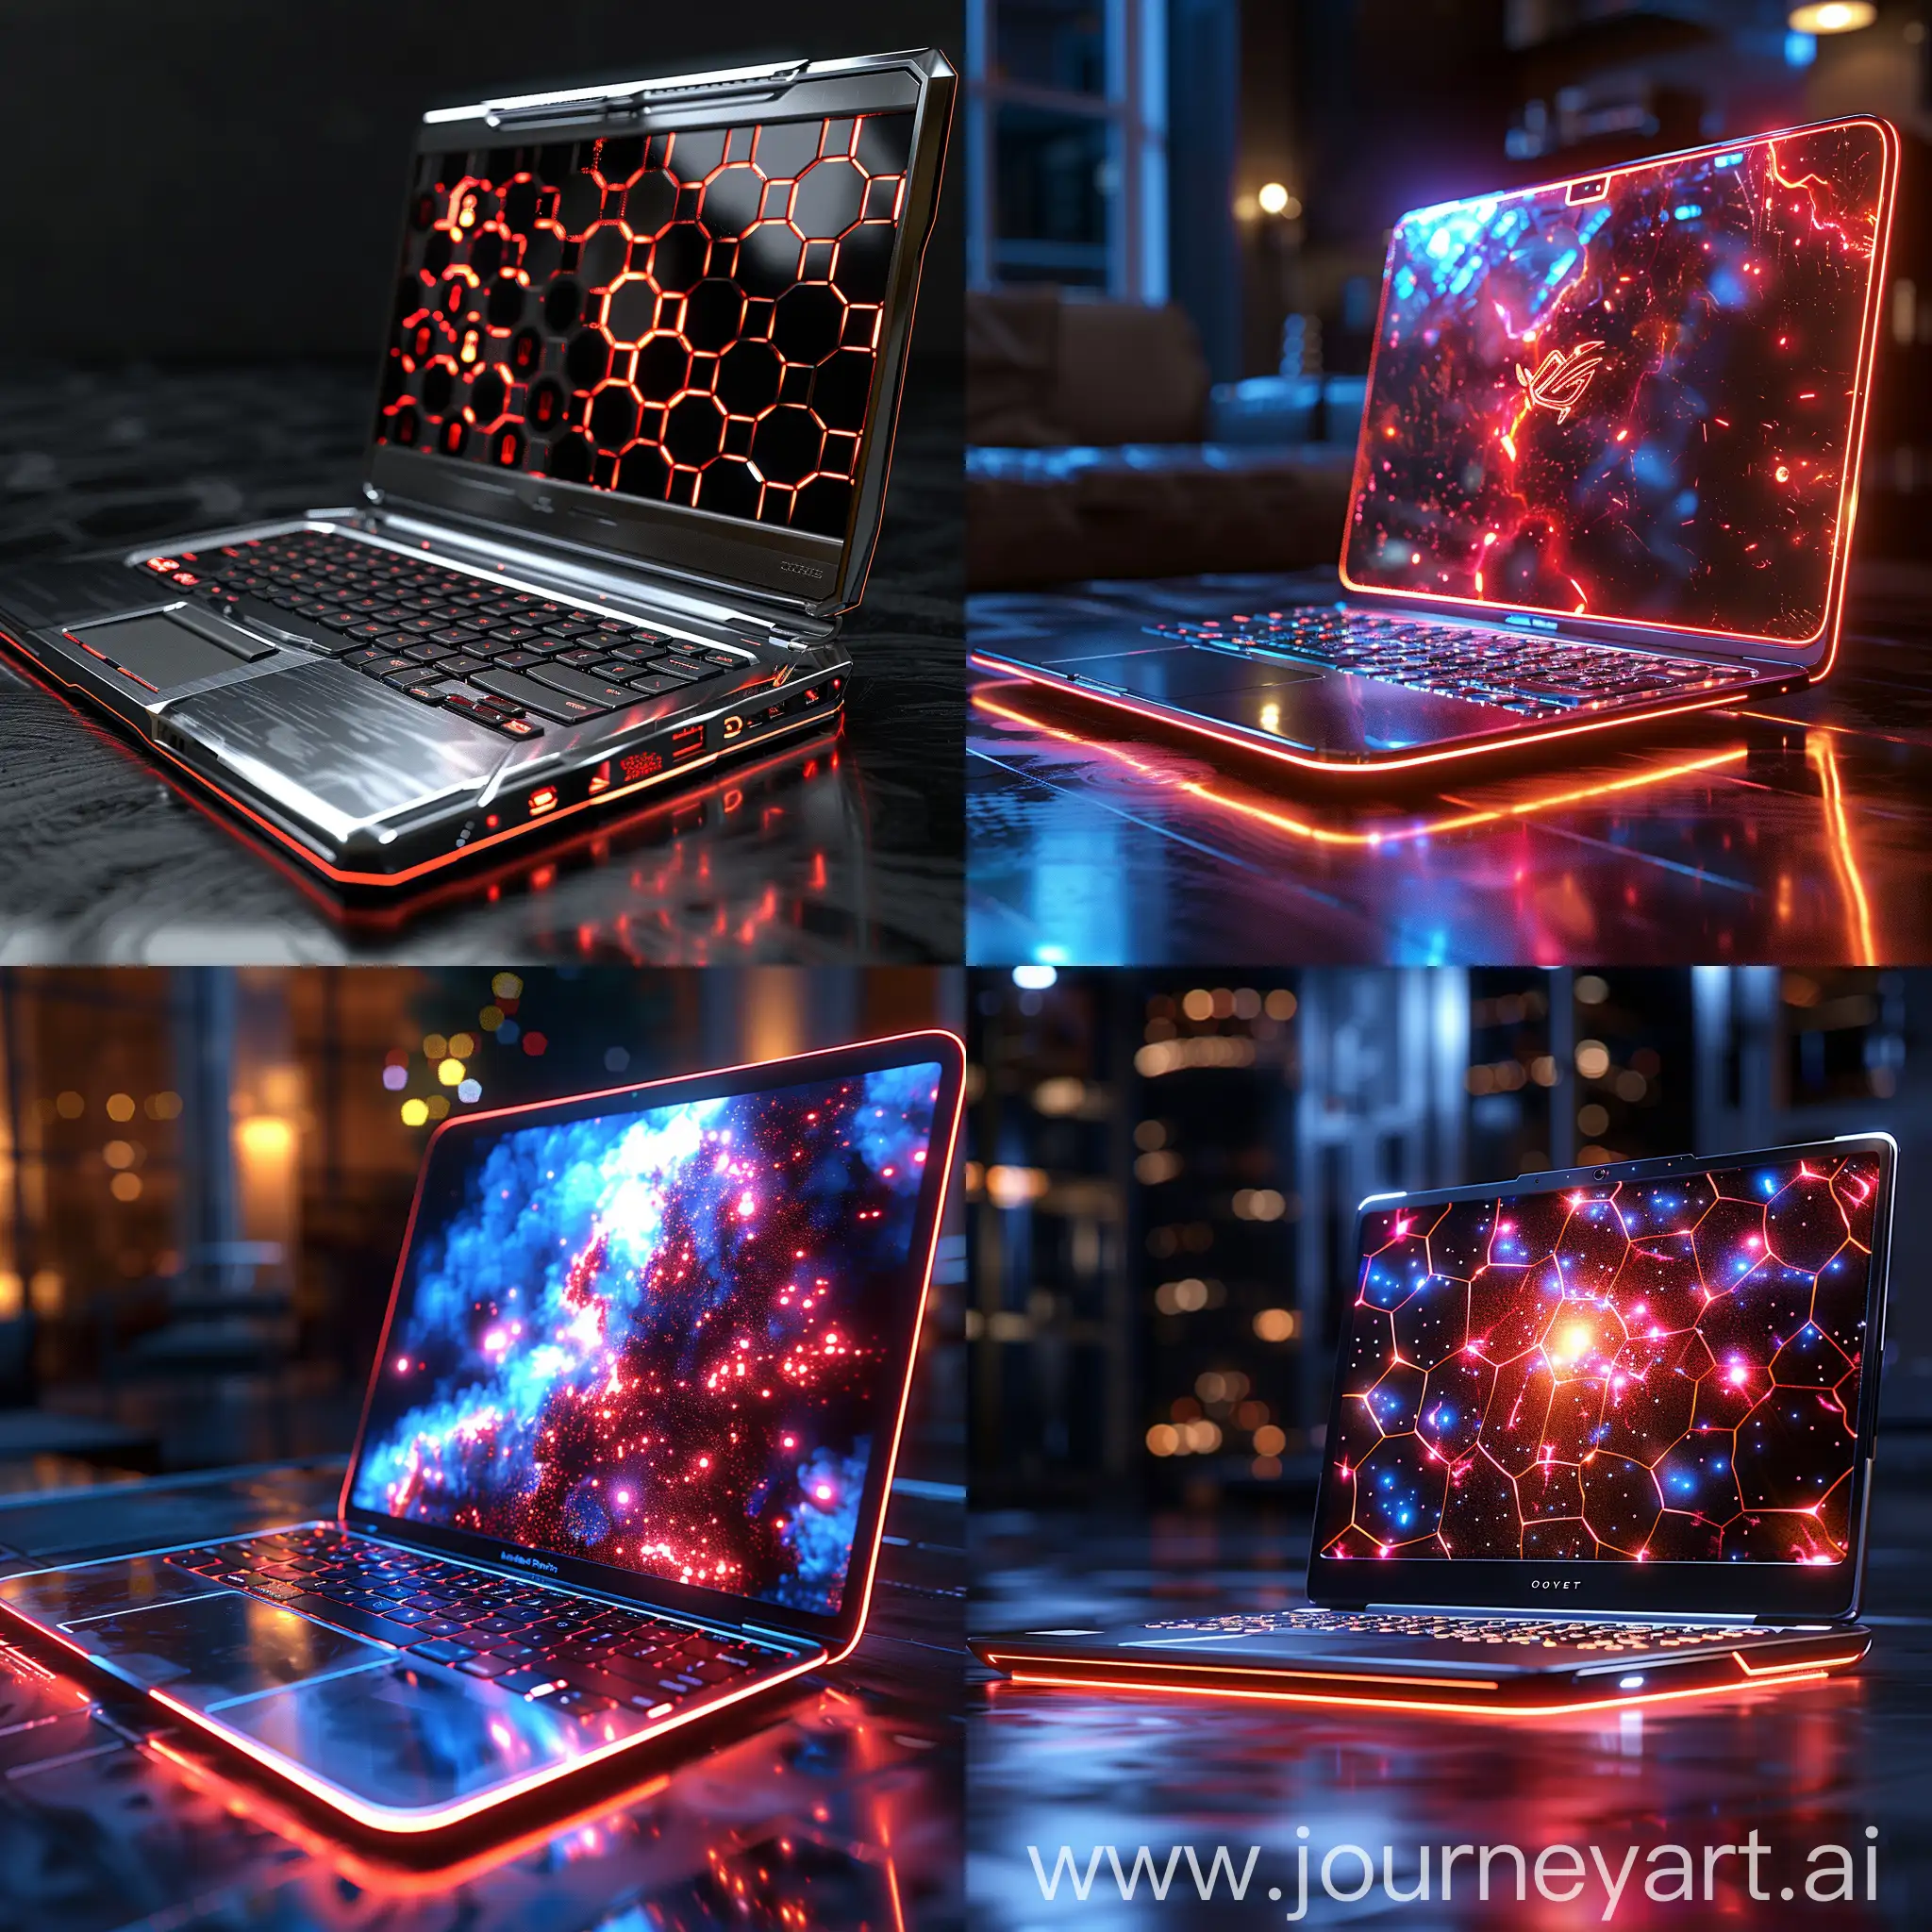 Futuristic-Stainless-Steel-Laptop-with-Smart-Materials